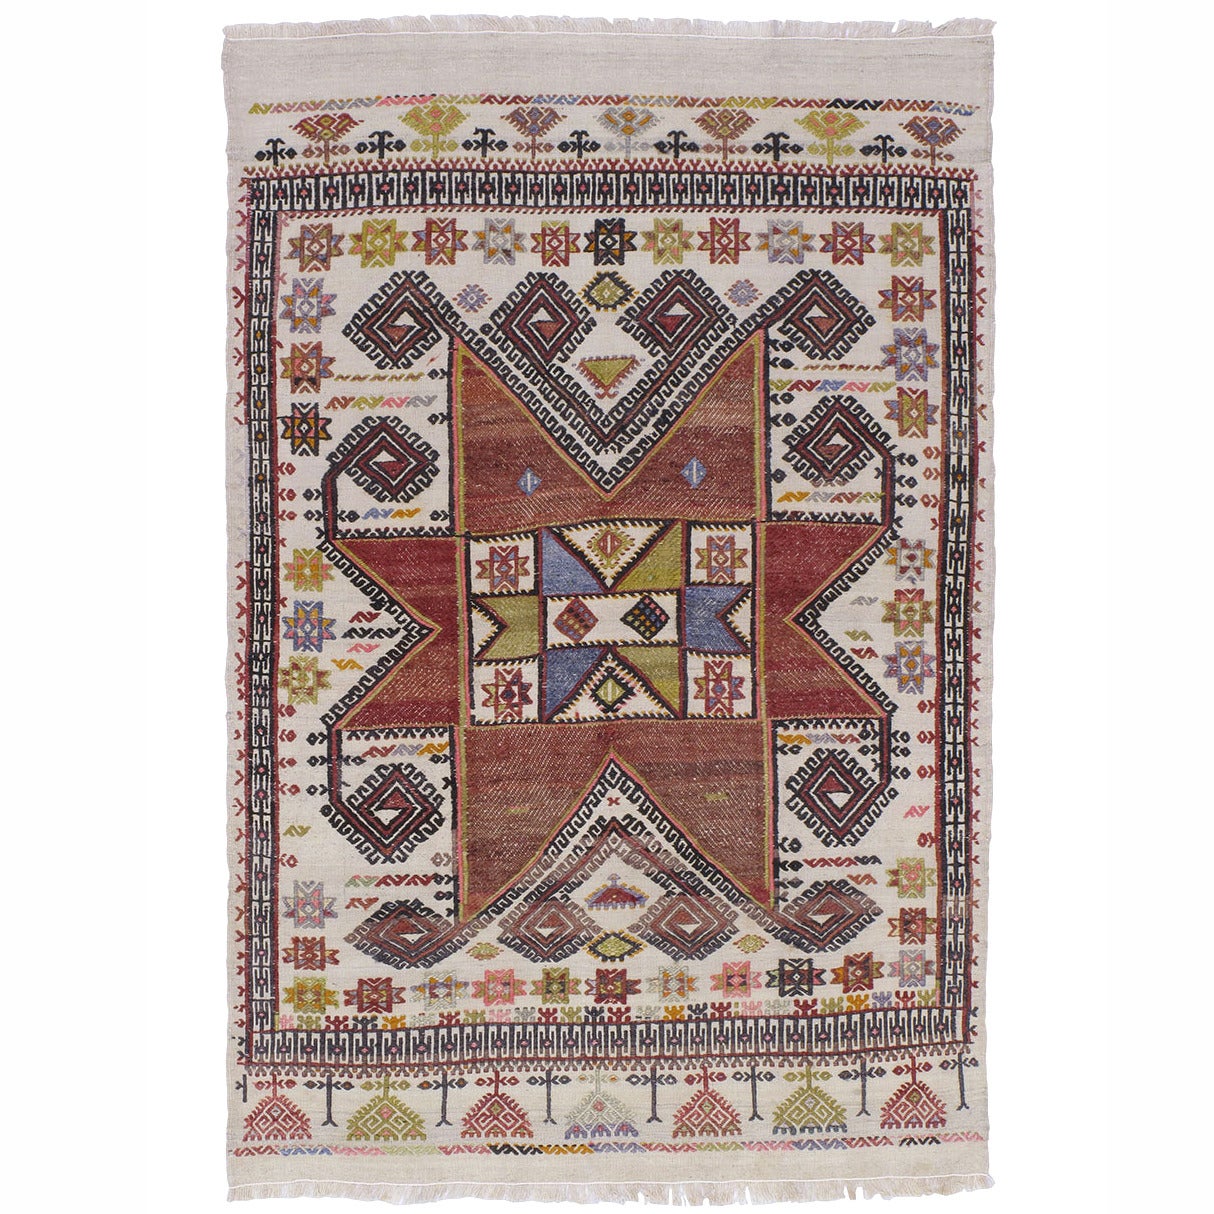 Small Kilim with Large Star